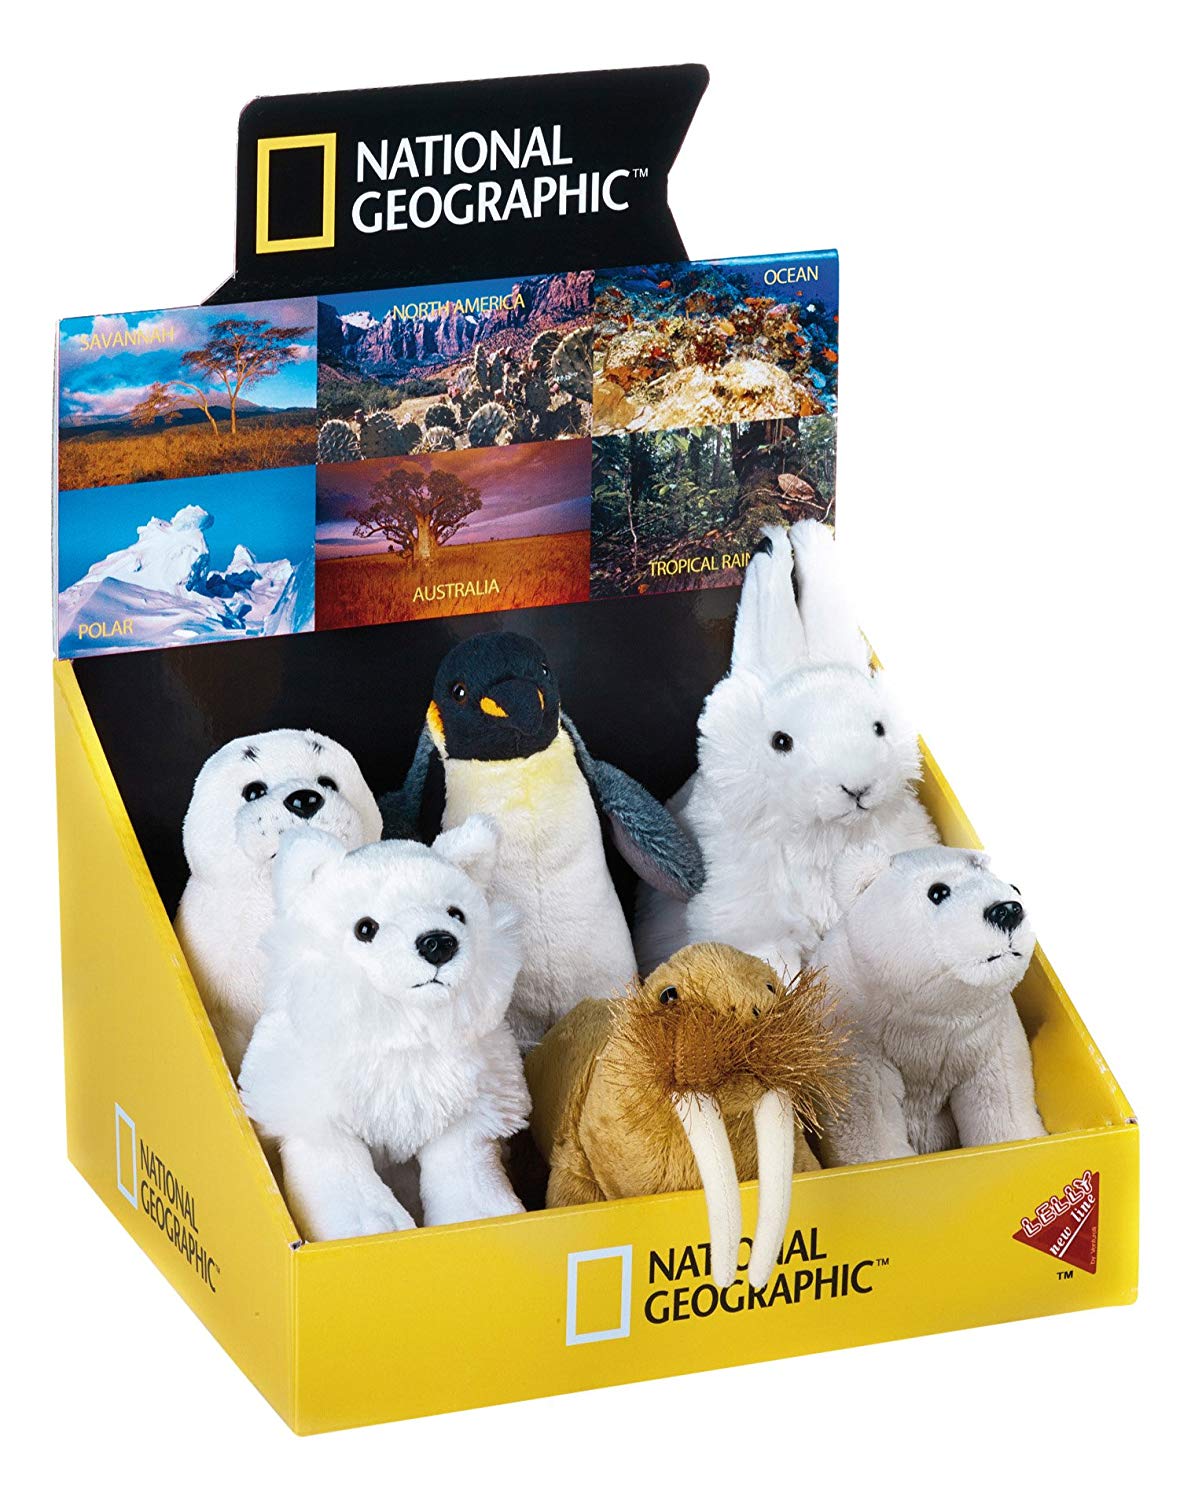 Surtido Peluches de National Geographic solo 16€